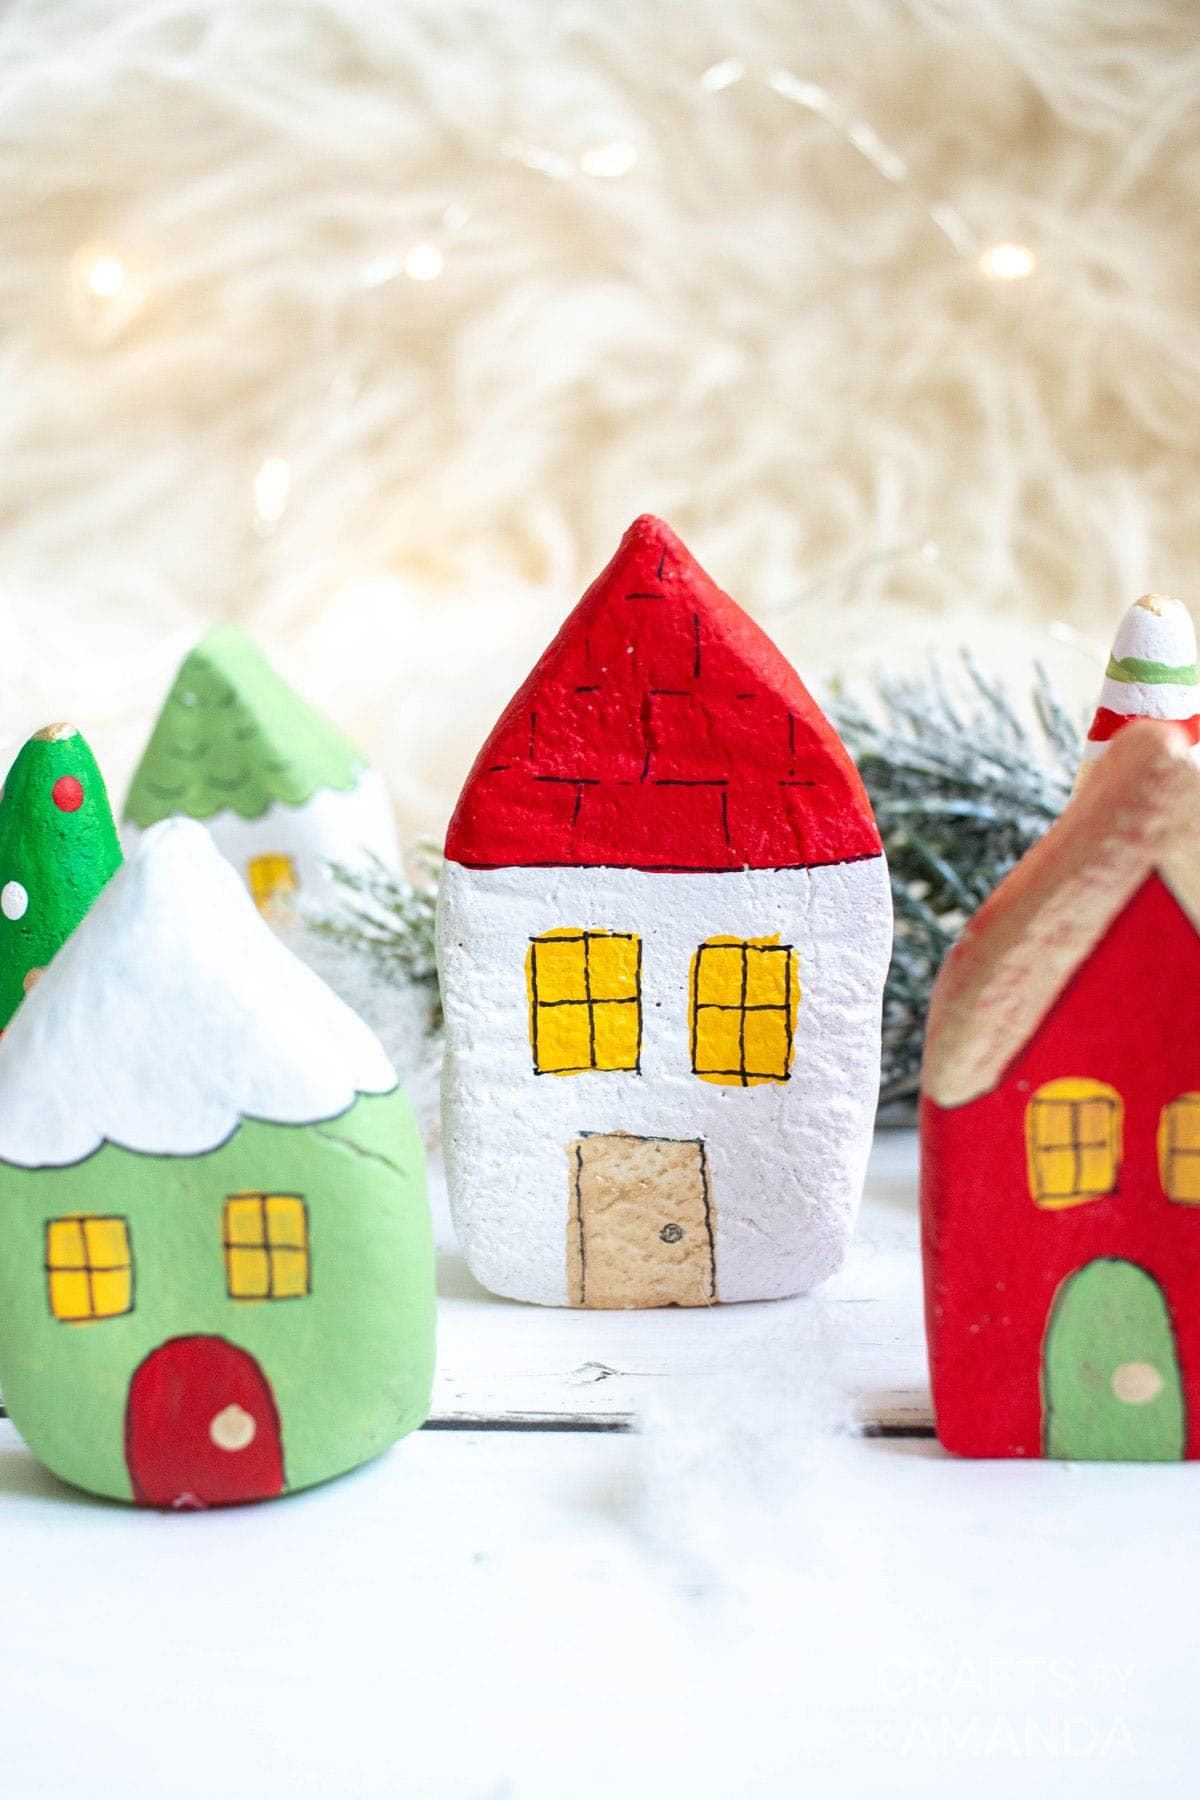 Salt dough houses painted in Christmas colors.